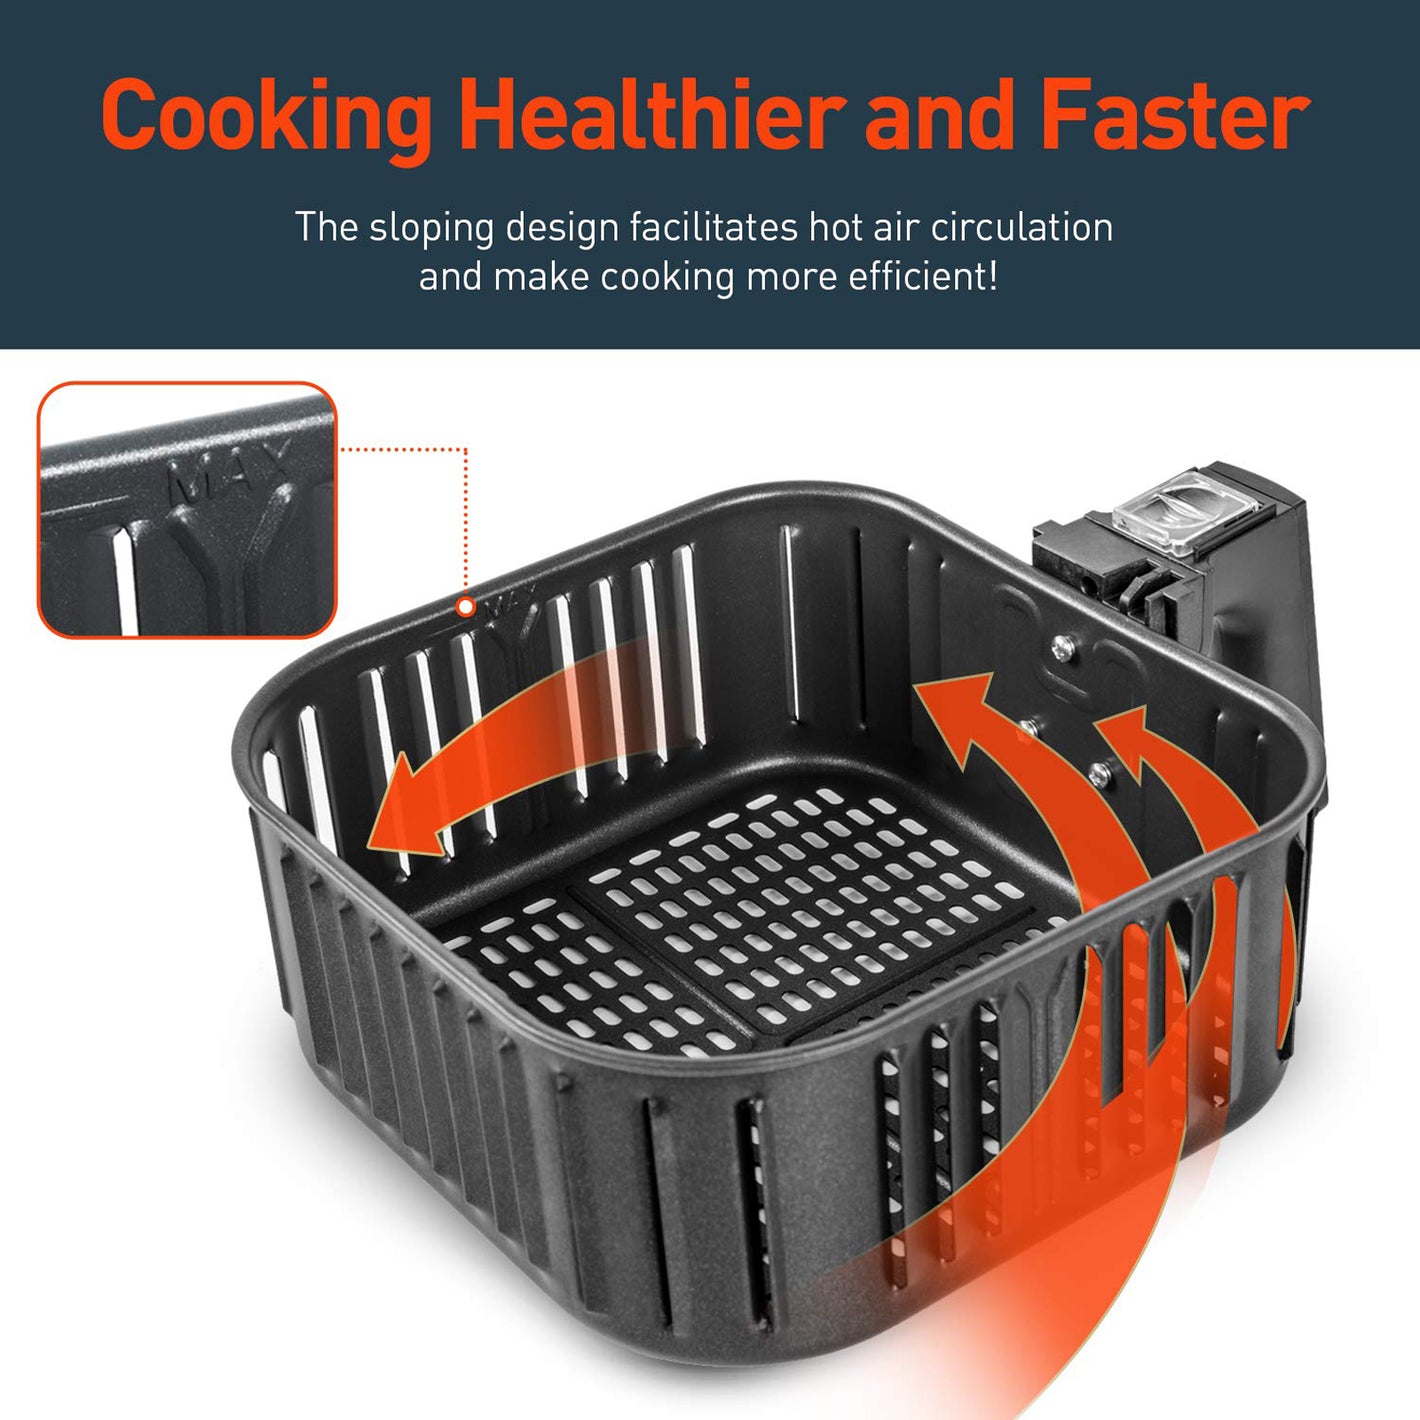 Cooking Healthier and Faster The sloping design facilitates hot air circulation and make cooking more efficient!